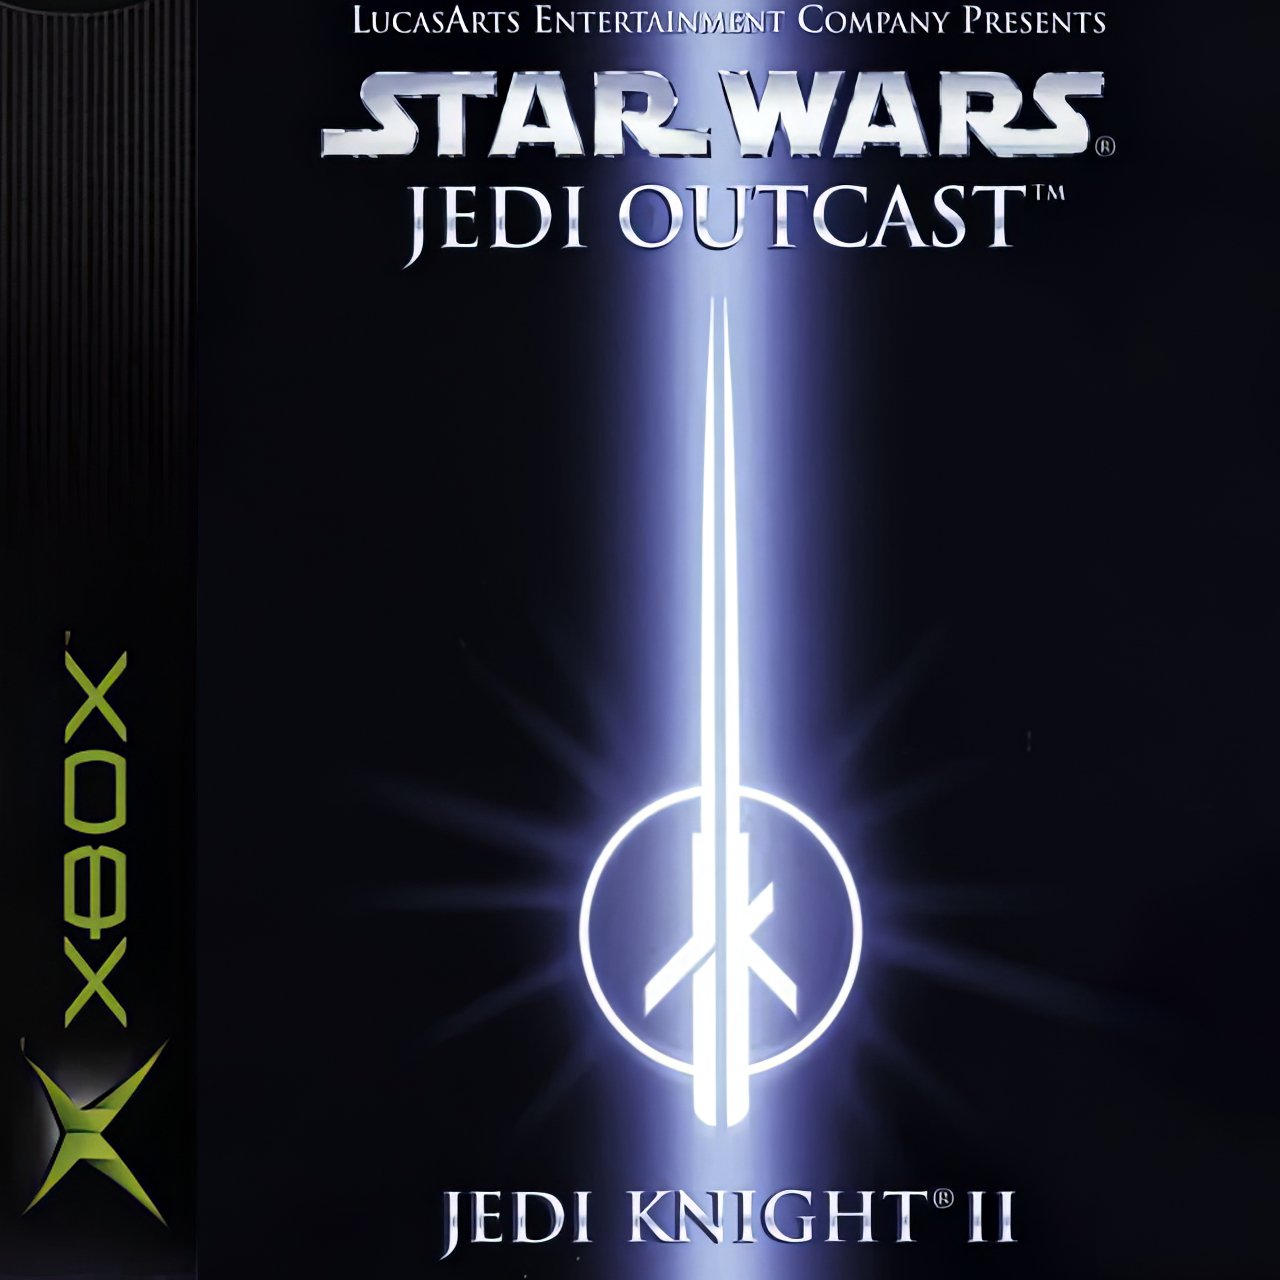 More information about "Jedi Outcast comes to Xbox Backwards Compatibility"